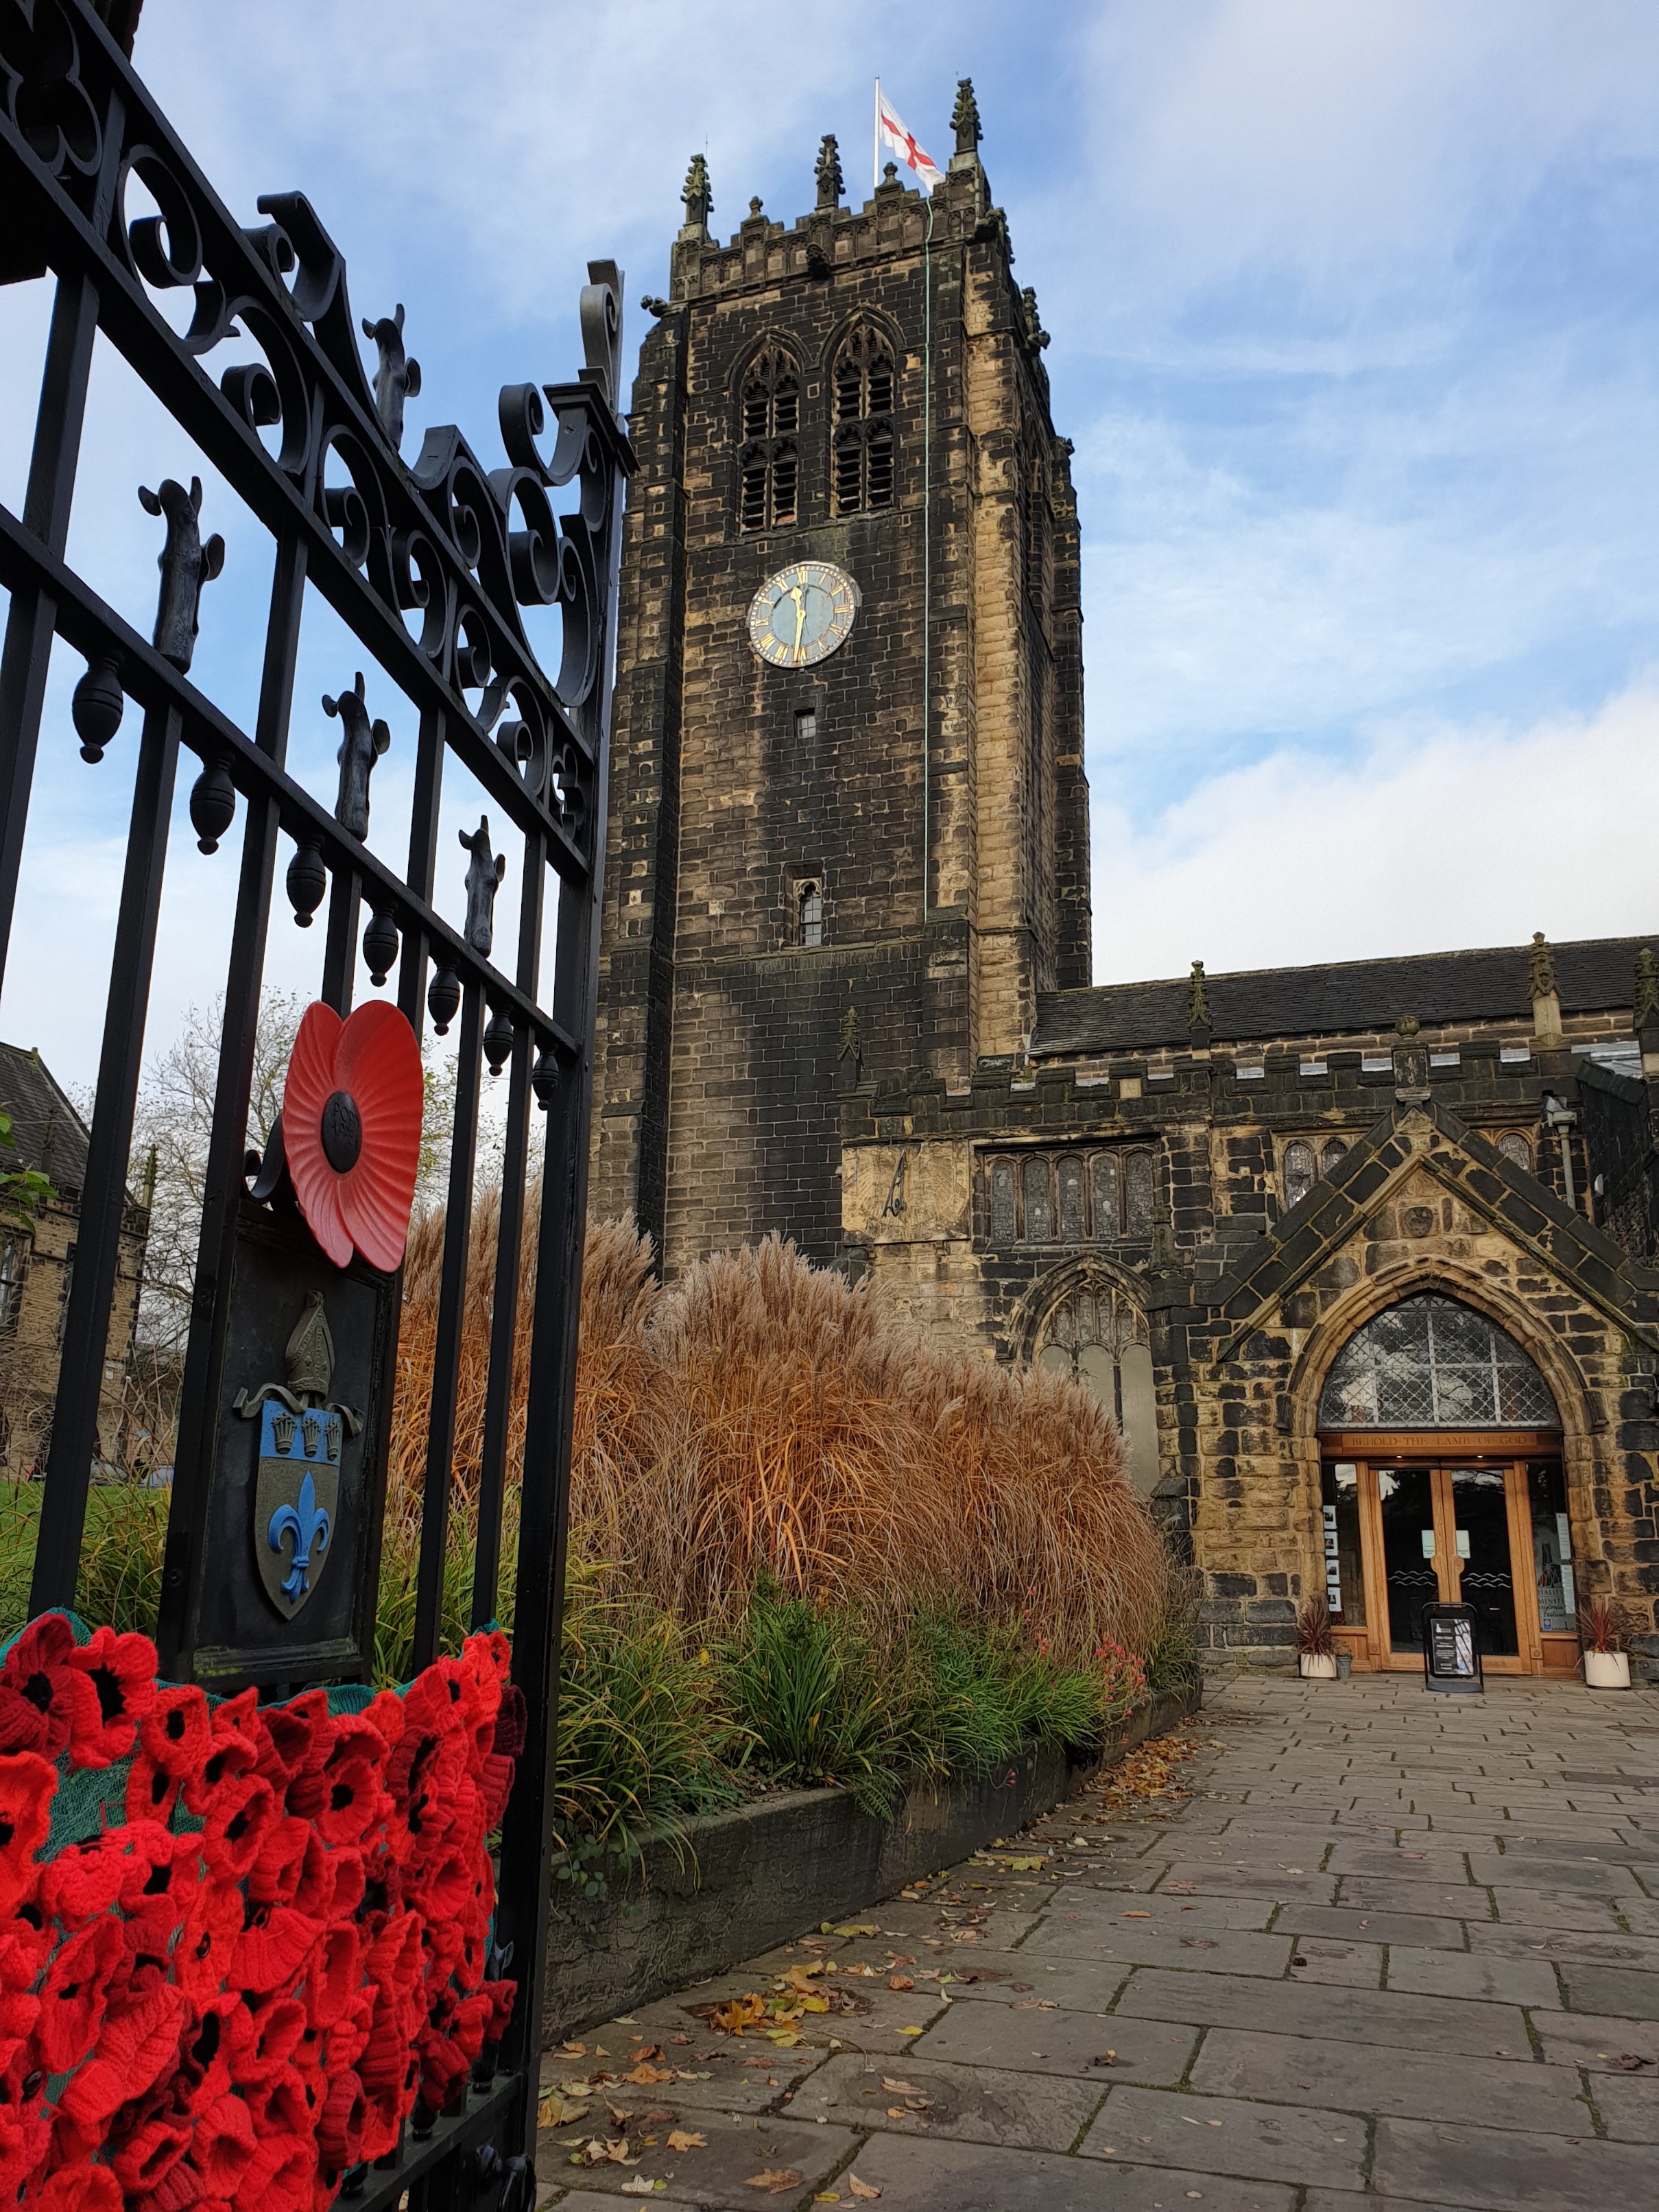 A gate decorated with knitted roses, Halifax Minster in the background